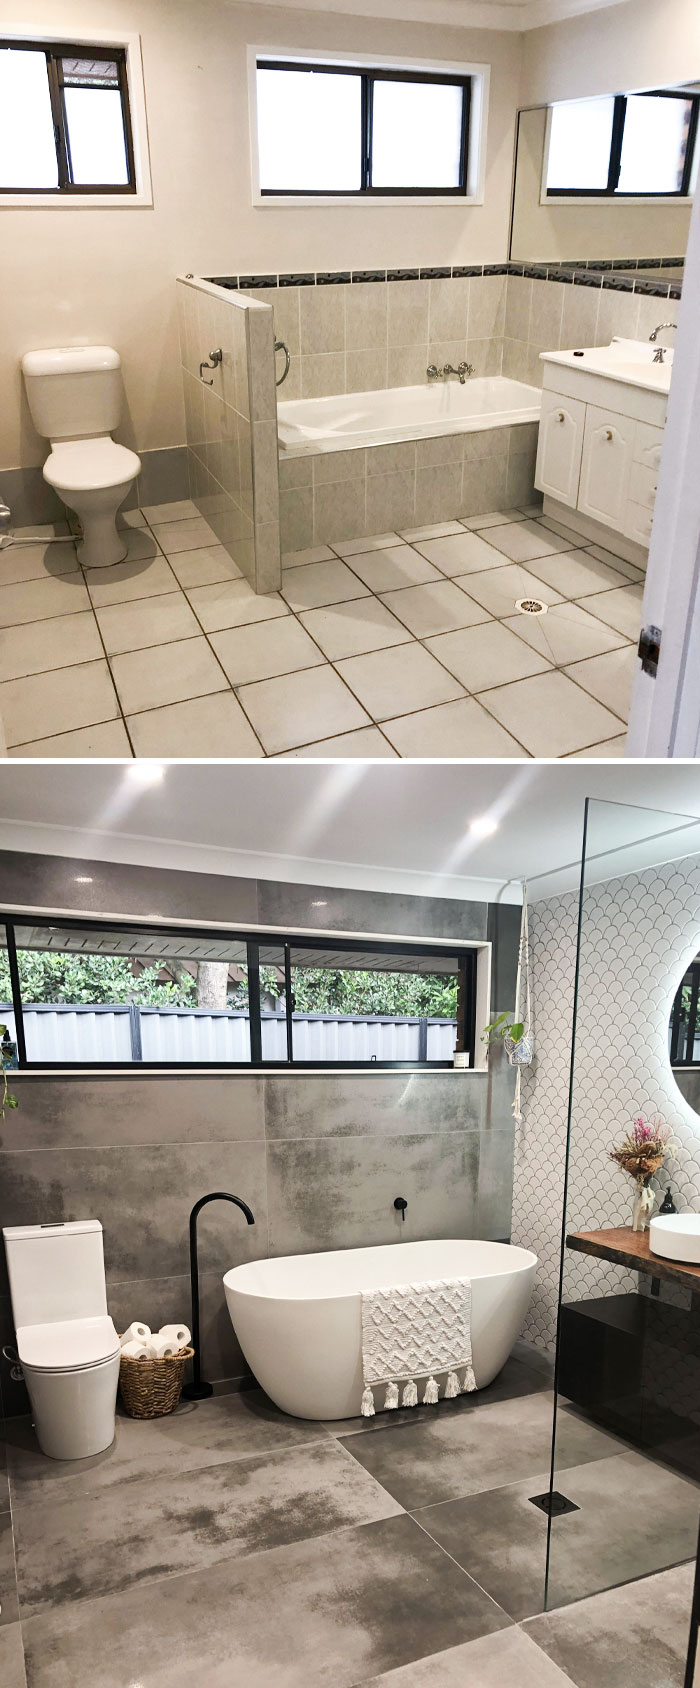 Before And After Of My Bathroom. It Cost Me Around $25,000. I Did All The Carpentry And Had To Rebuild The Walls Around The Shower As They Had Water Rot